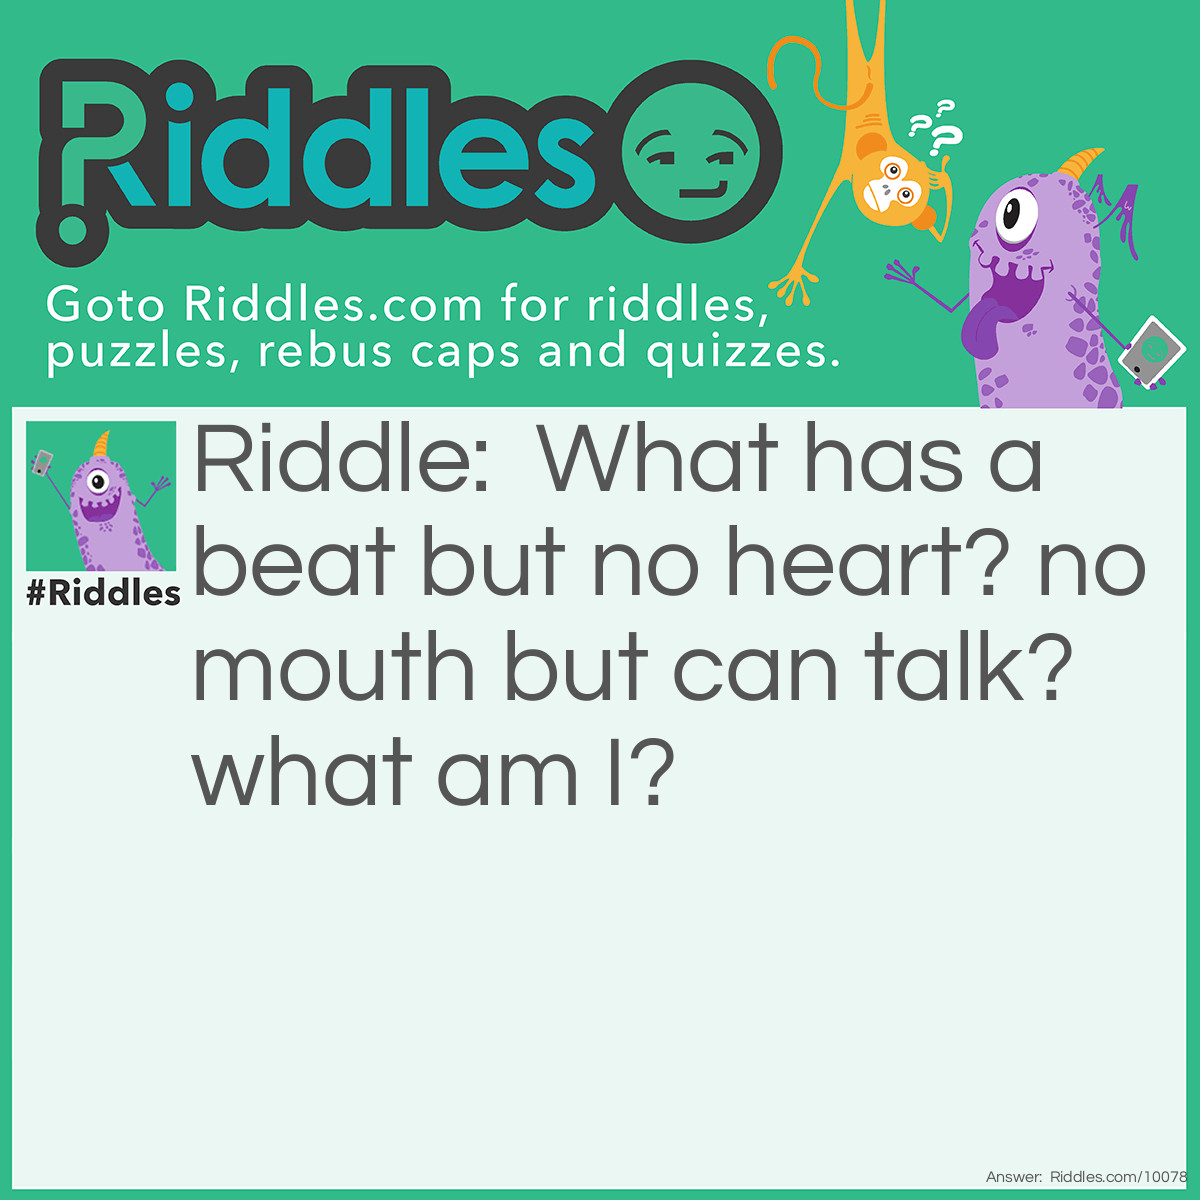 Riddle: What has a beat but no heart? no mouth but can talk? what am I? Answer: Speaker.